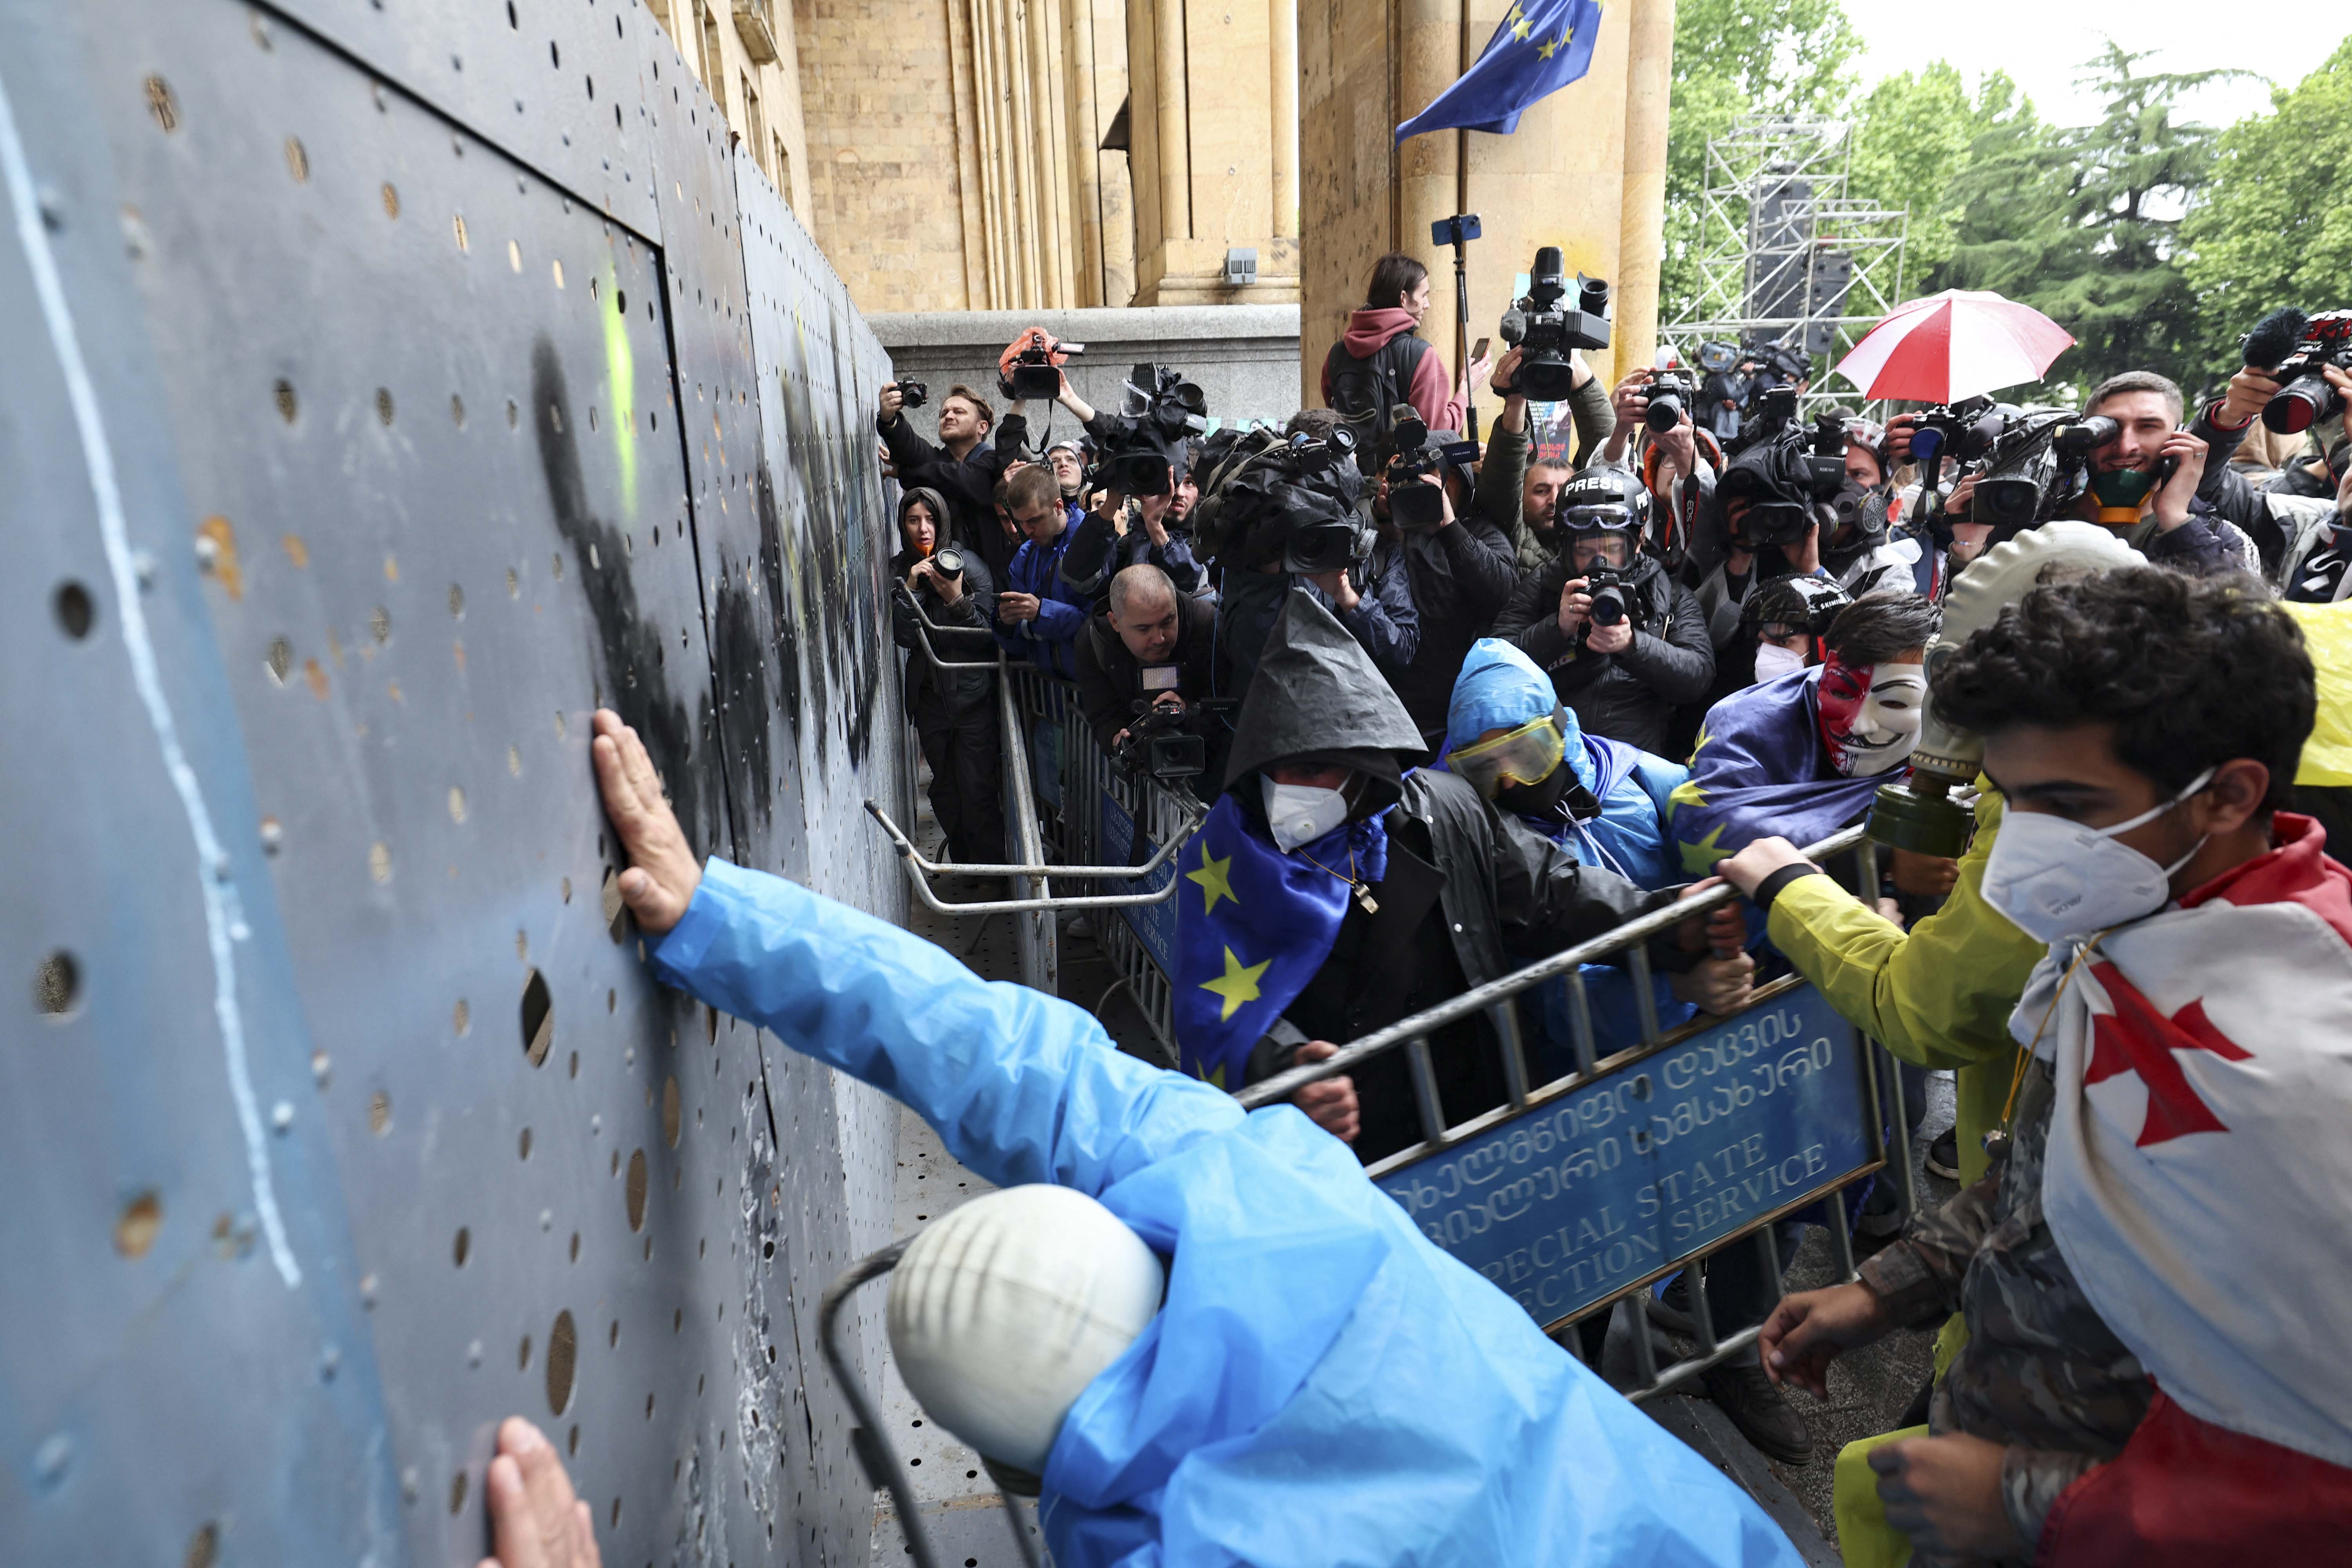 Georgian demonstrators attempt to break into the parliament through a metal barrier erected in front of its main gates, during a rally against the controversial "foreign influence" bill in Tbilisi, Georgia, on Tuesday, May 14. 